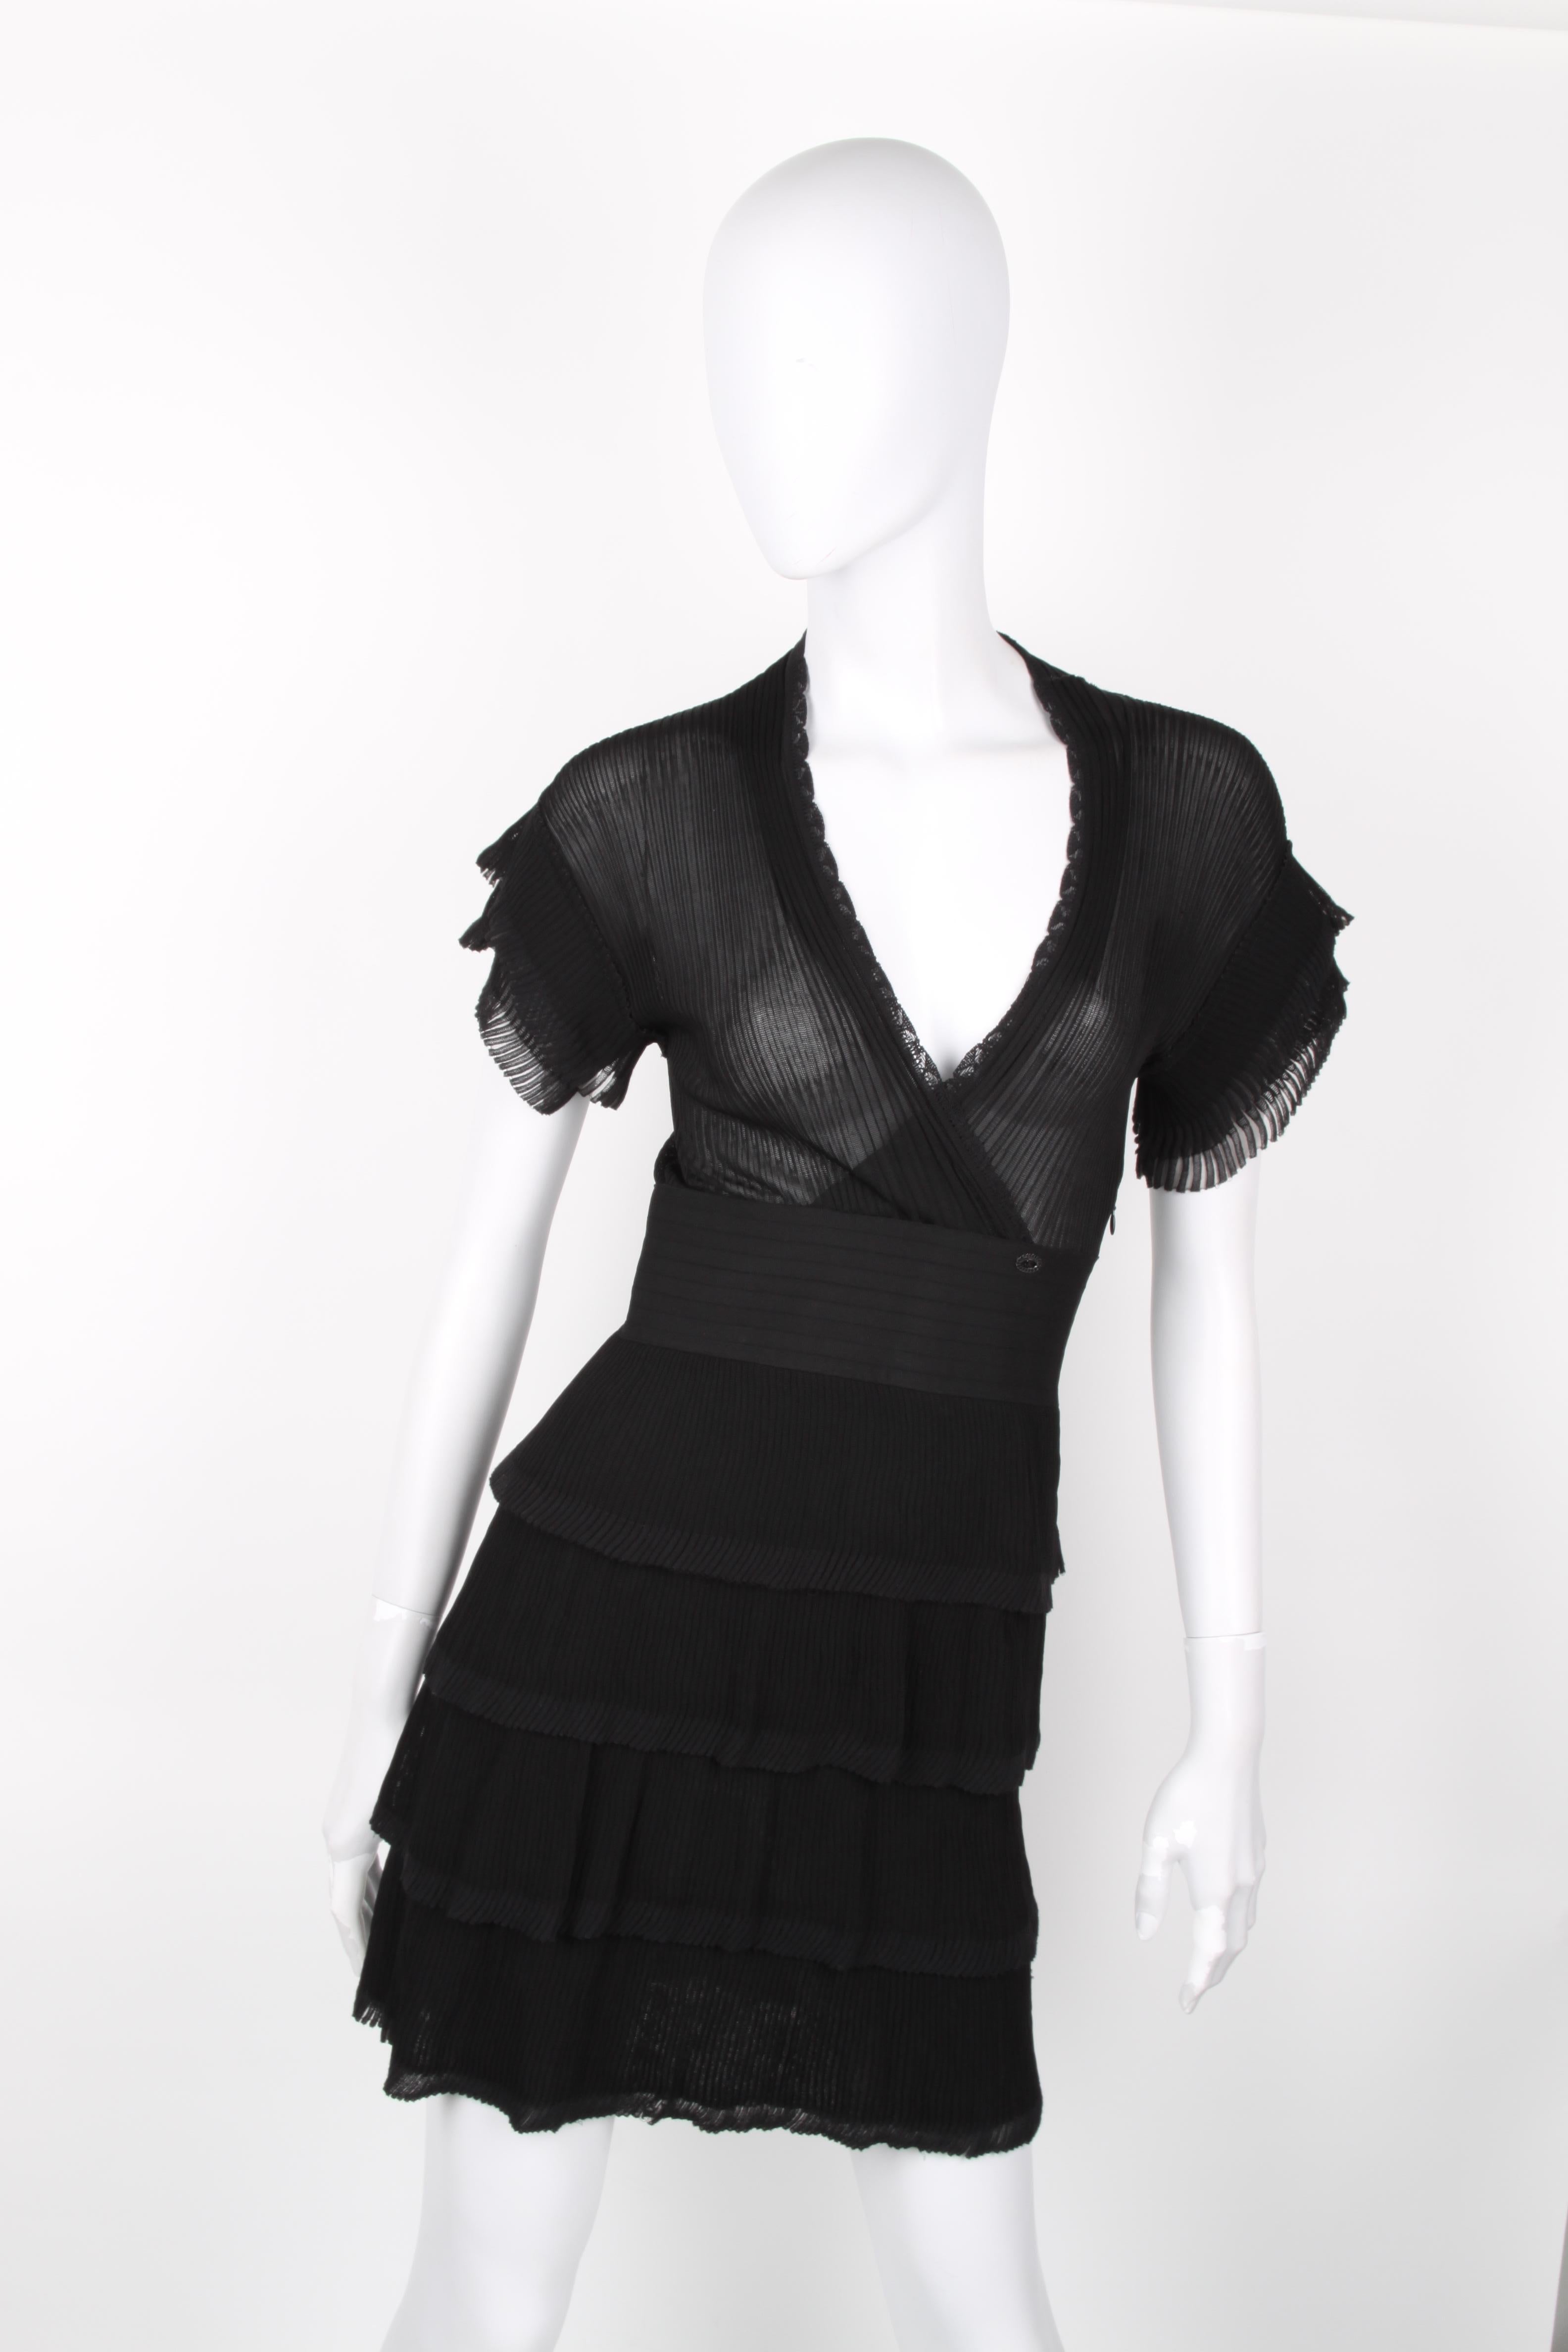 Chanel Fall/Winter 2007 black layered short sleeve dress In Good Condition For Sale In Baarn, NL